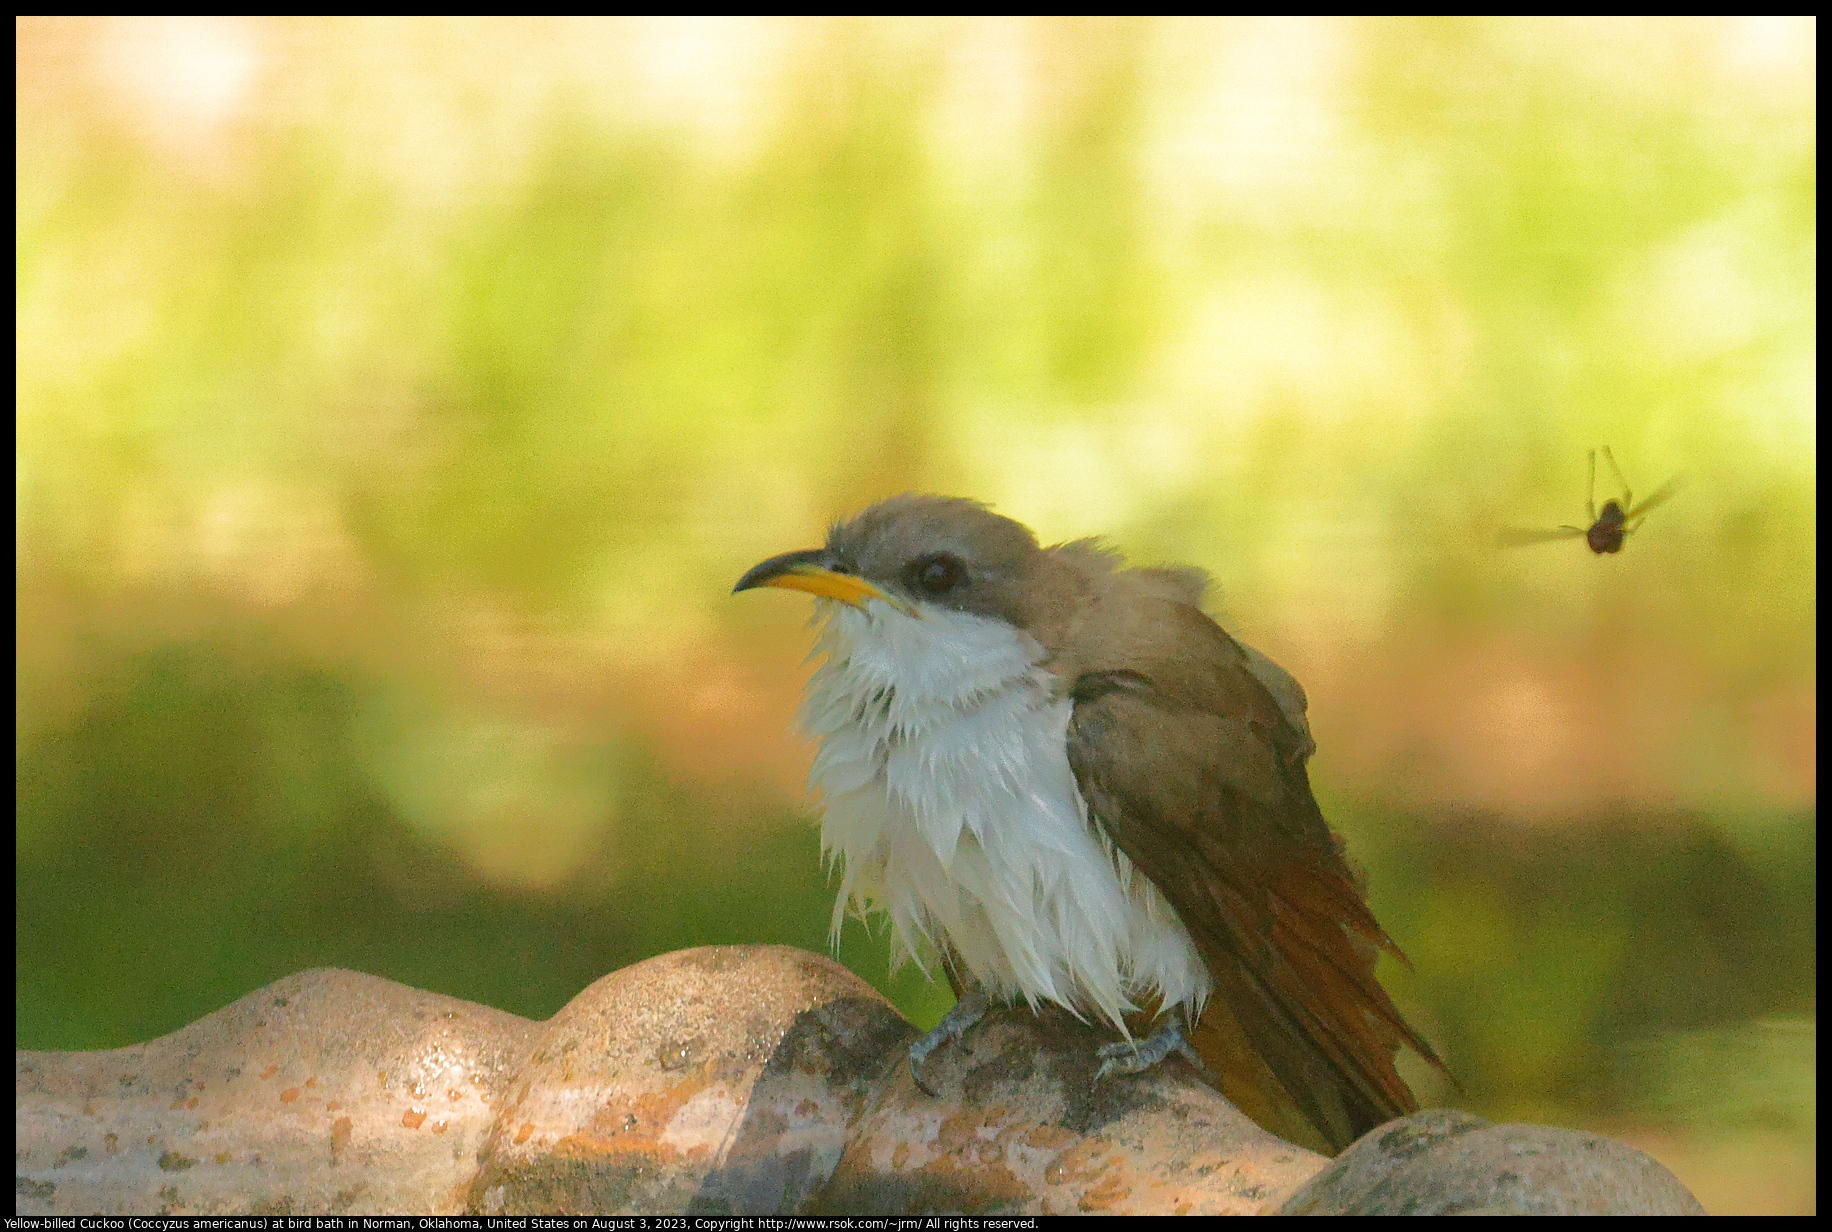 Yellow-billed Cuckoo (Coccyzus americanus) at bird bath in Norman, Oklahoma, United States on August 3, 2023